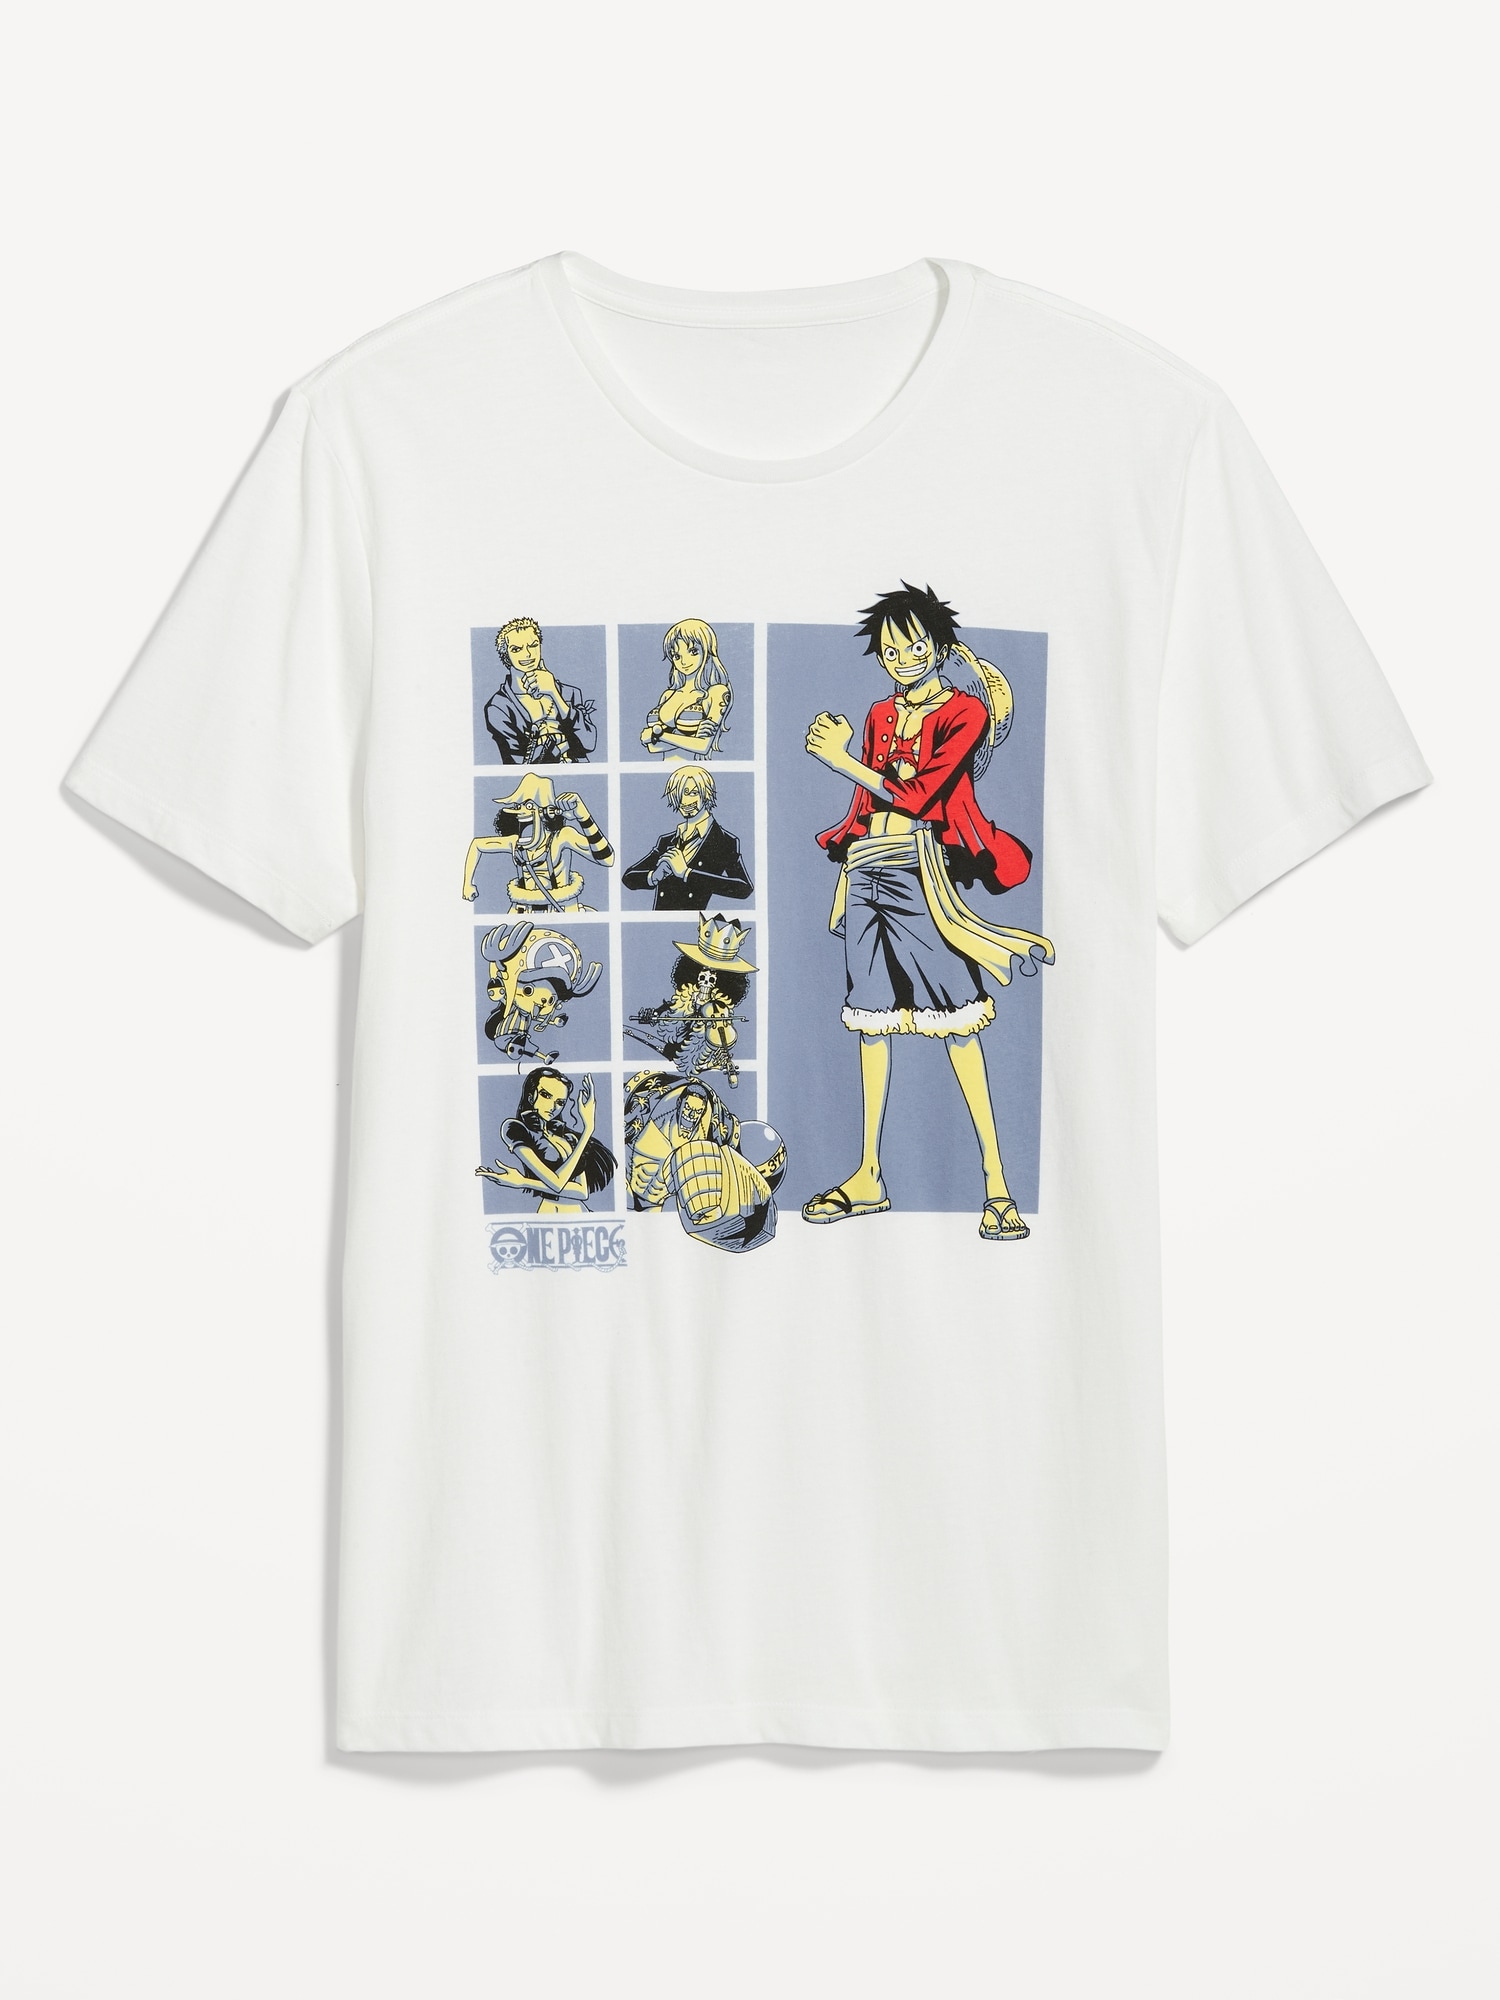 ONE PIECE© Gender-Neutral T-Shirt for Adults